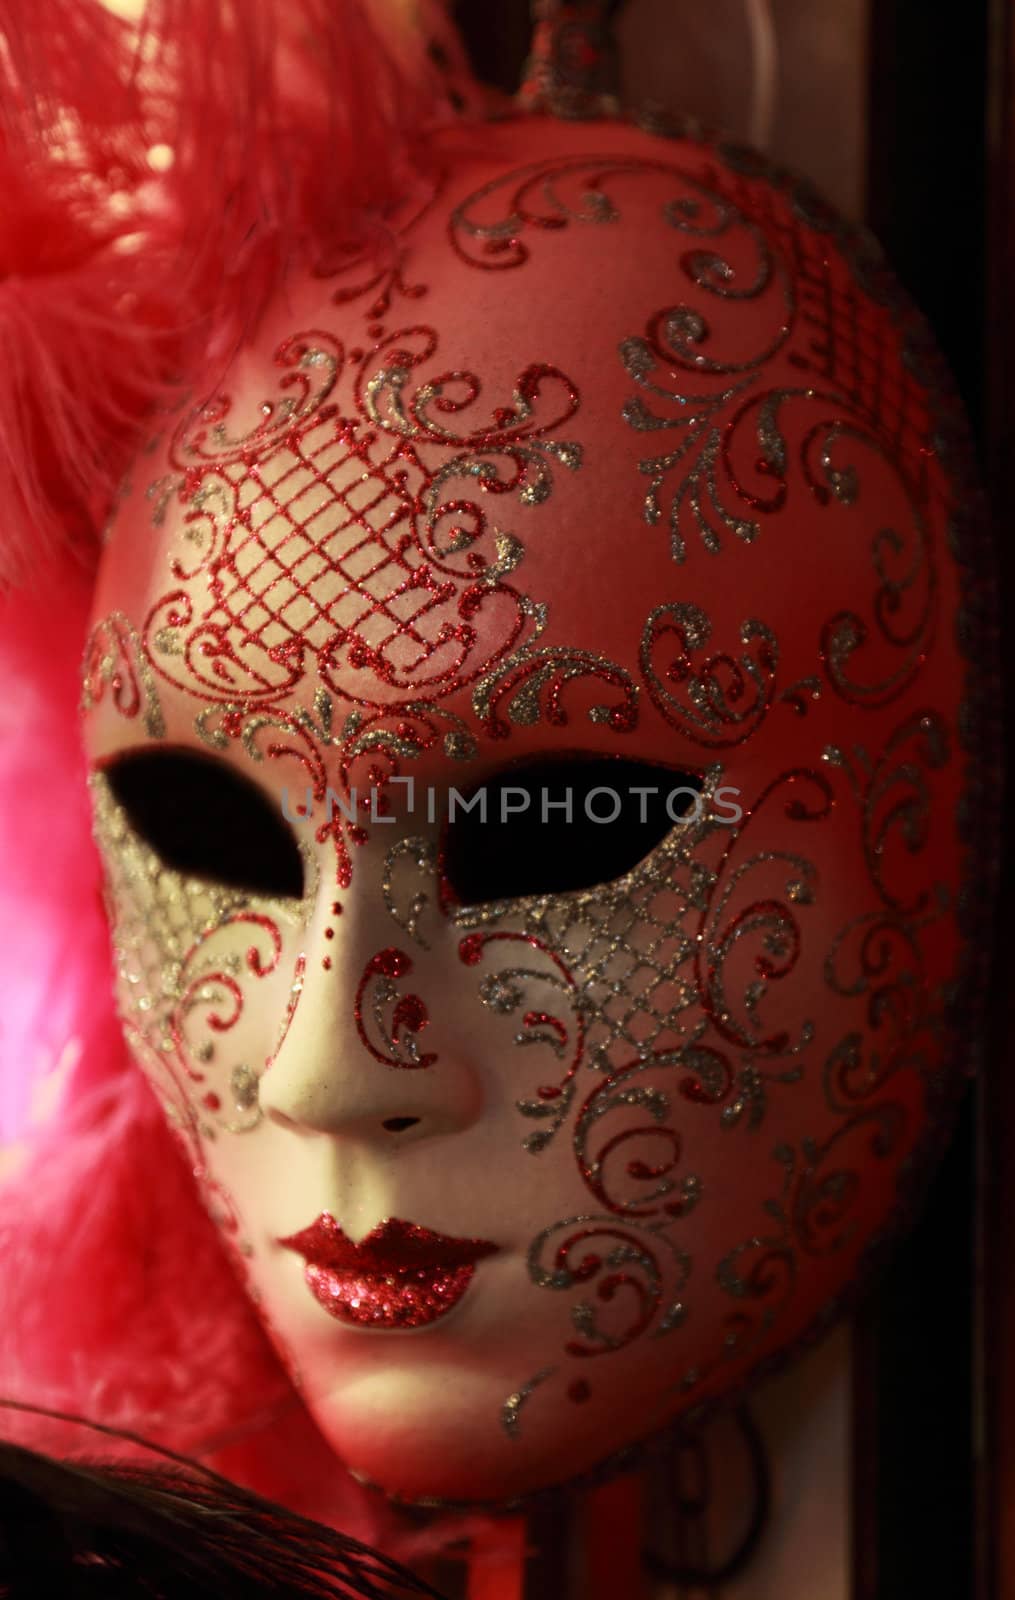 Image of a beautiful Venetian mask on a souvenir shop stand in natural lighting conditions.Soft focus.